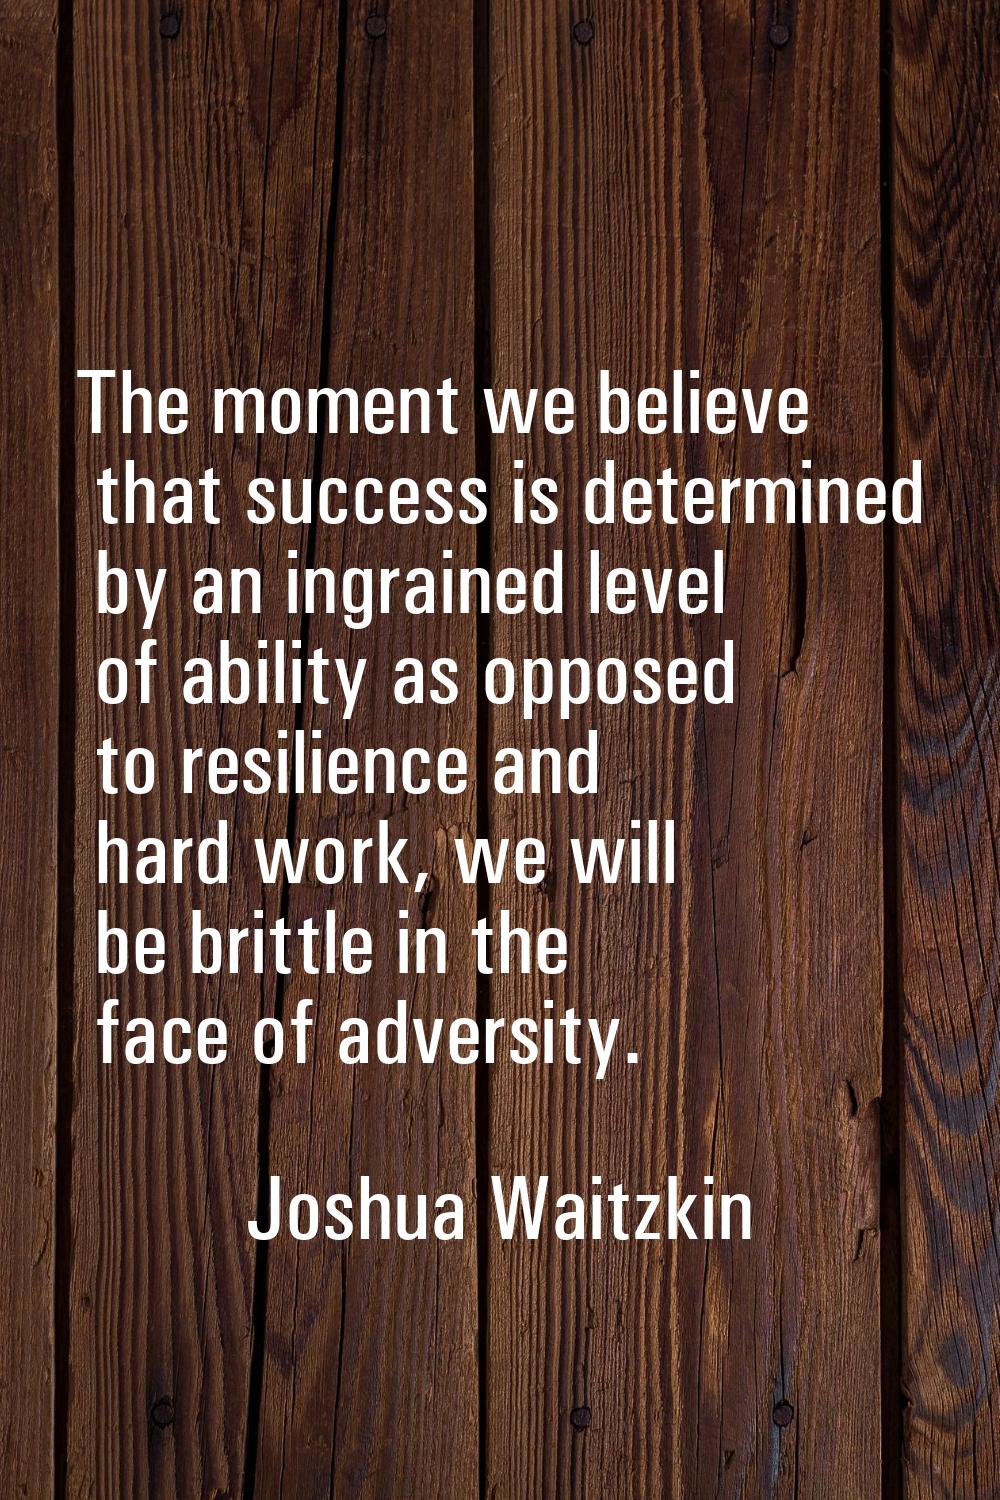 The moment we believe that success is determined by an ingrained level of ability as opposed to res